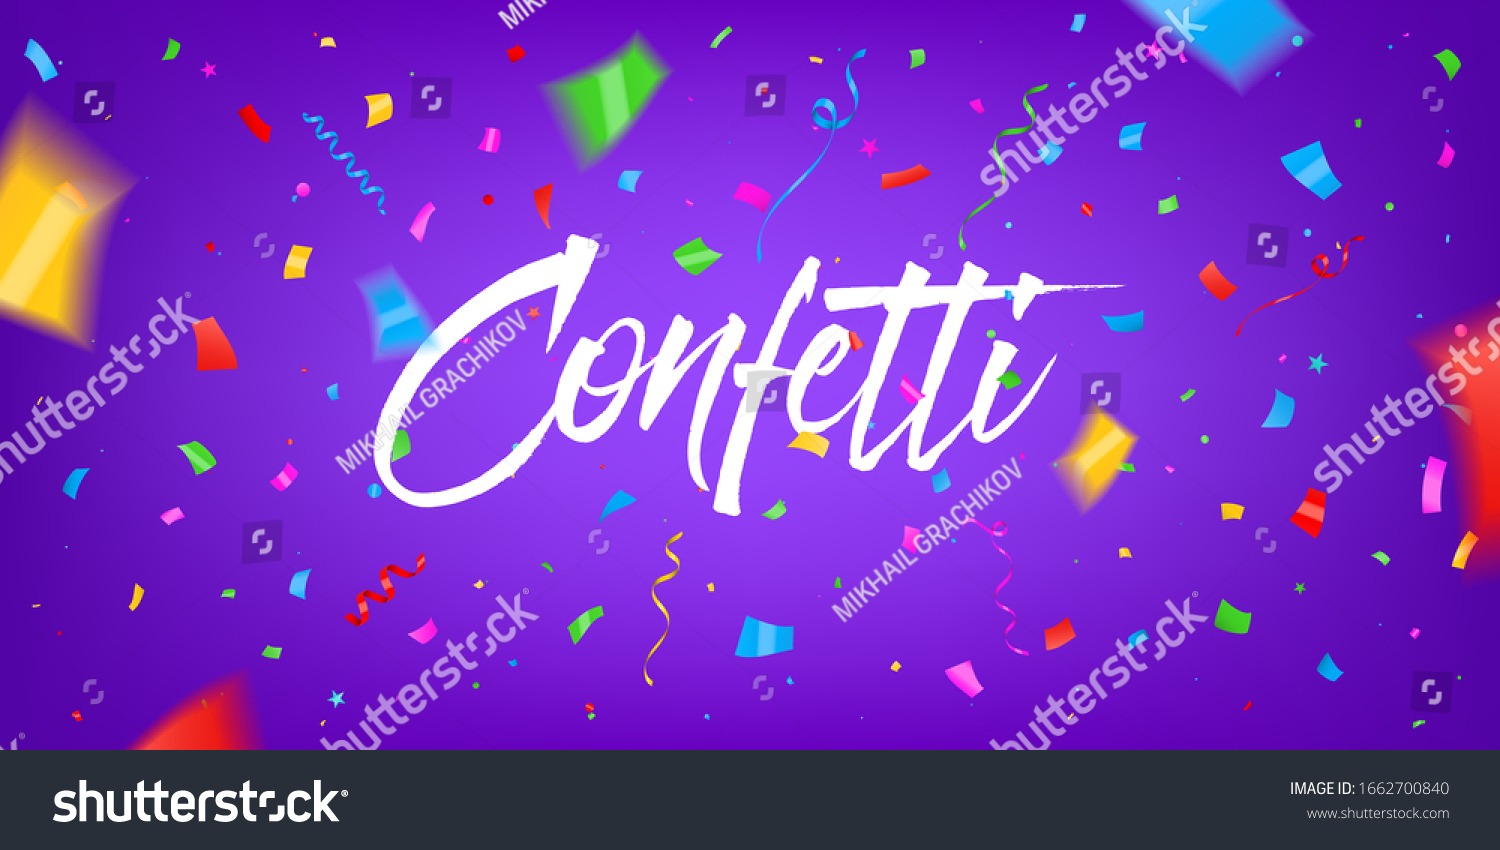 Creative vector illustration of festival confetti background. Art design New year party, happy birthday, holiday festive conffeti template. Abstract concept graphic draw prize, win congrats element #1662700840